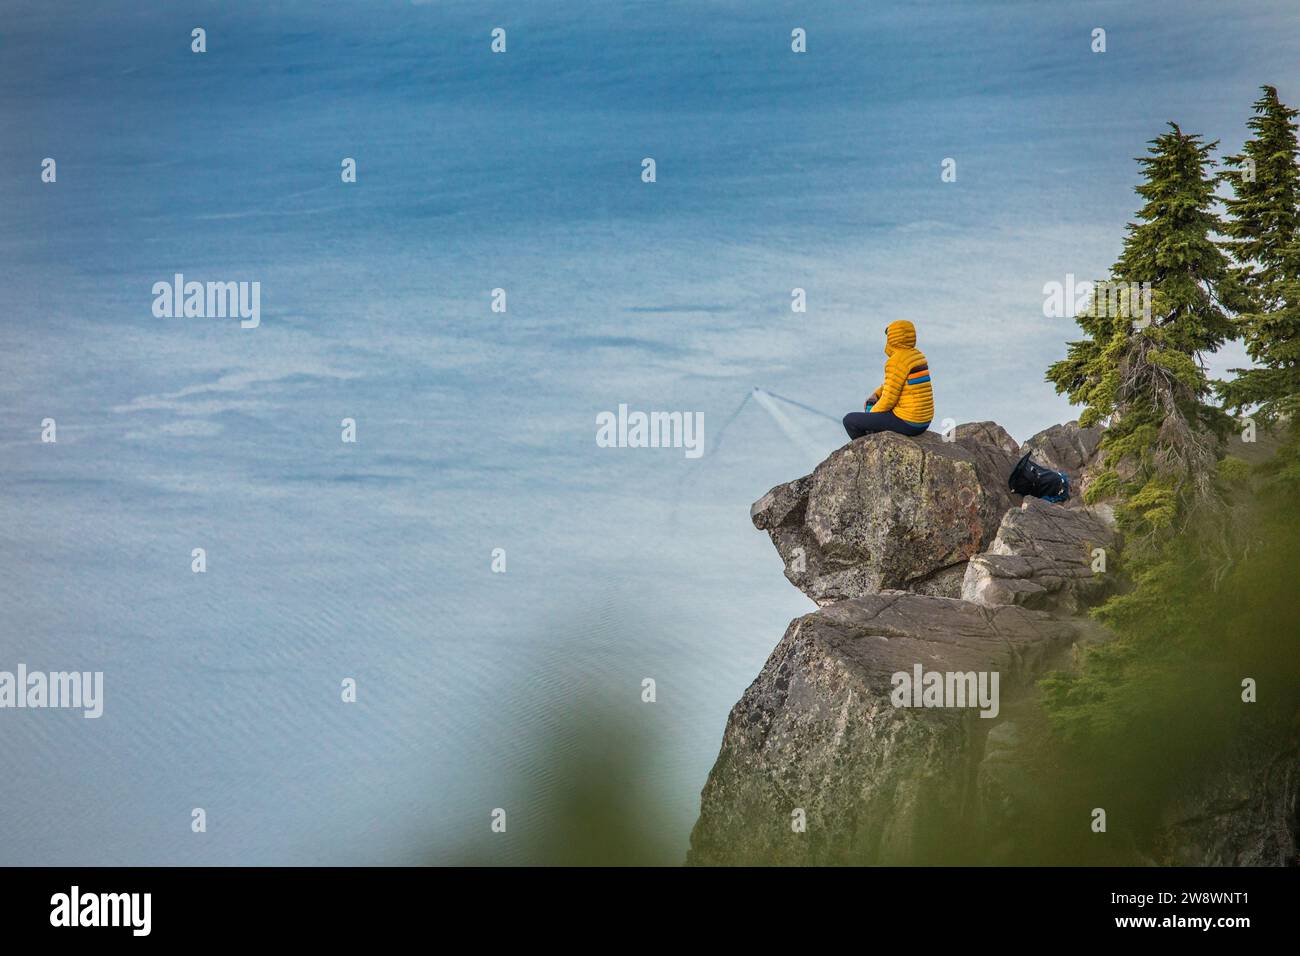 Backpacker sitting on rocky summit enjoying view of Pacific Ocean Stock Photo